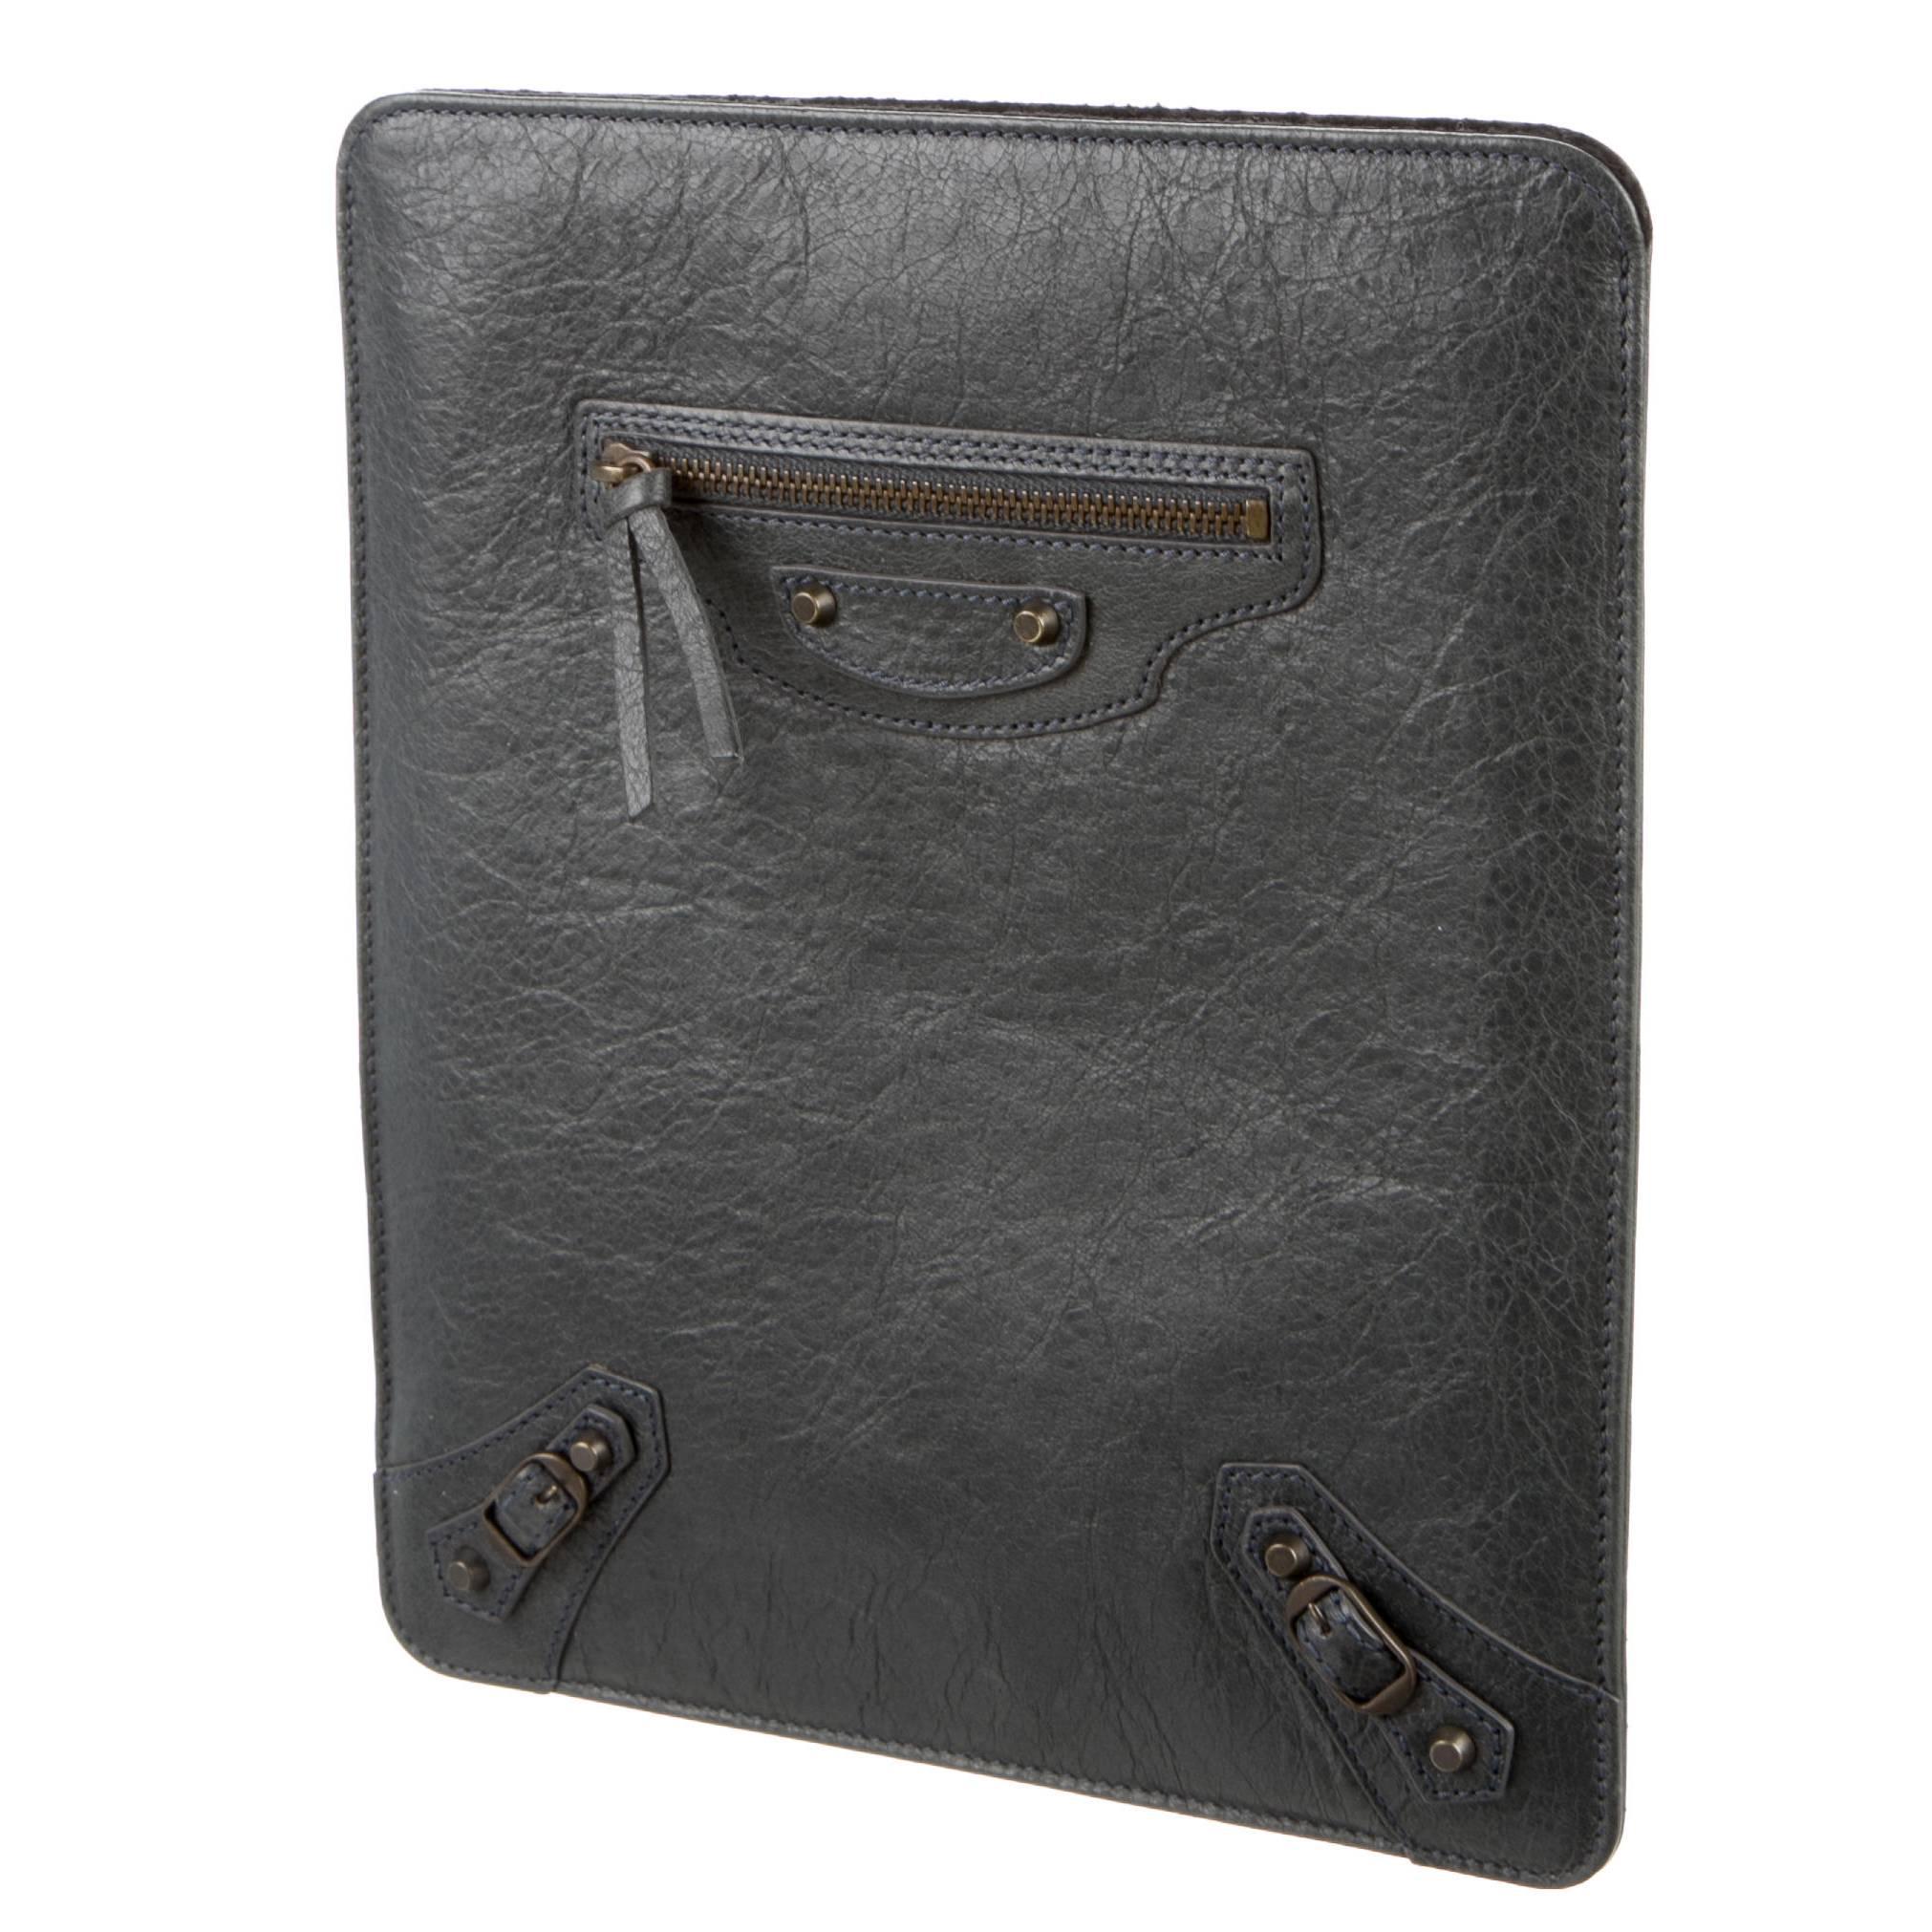 Balenciaga NEW Leather iPad Tech Accessory Storage Travel Carrying Case